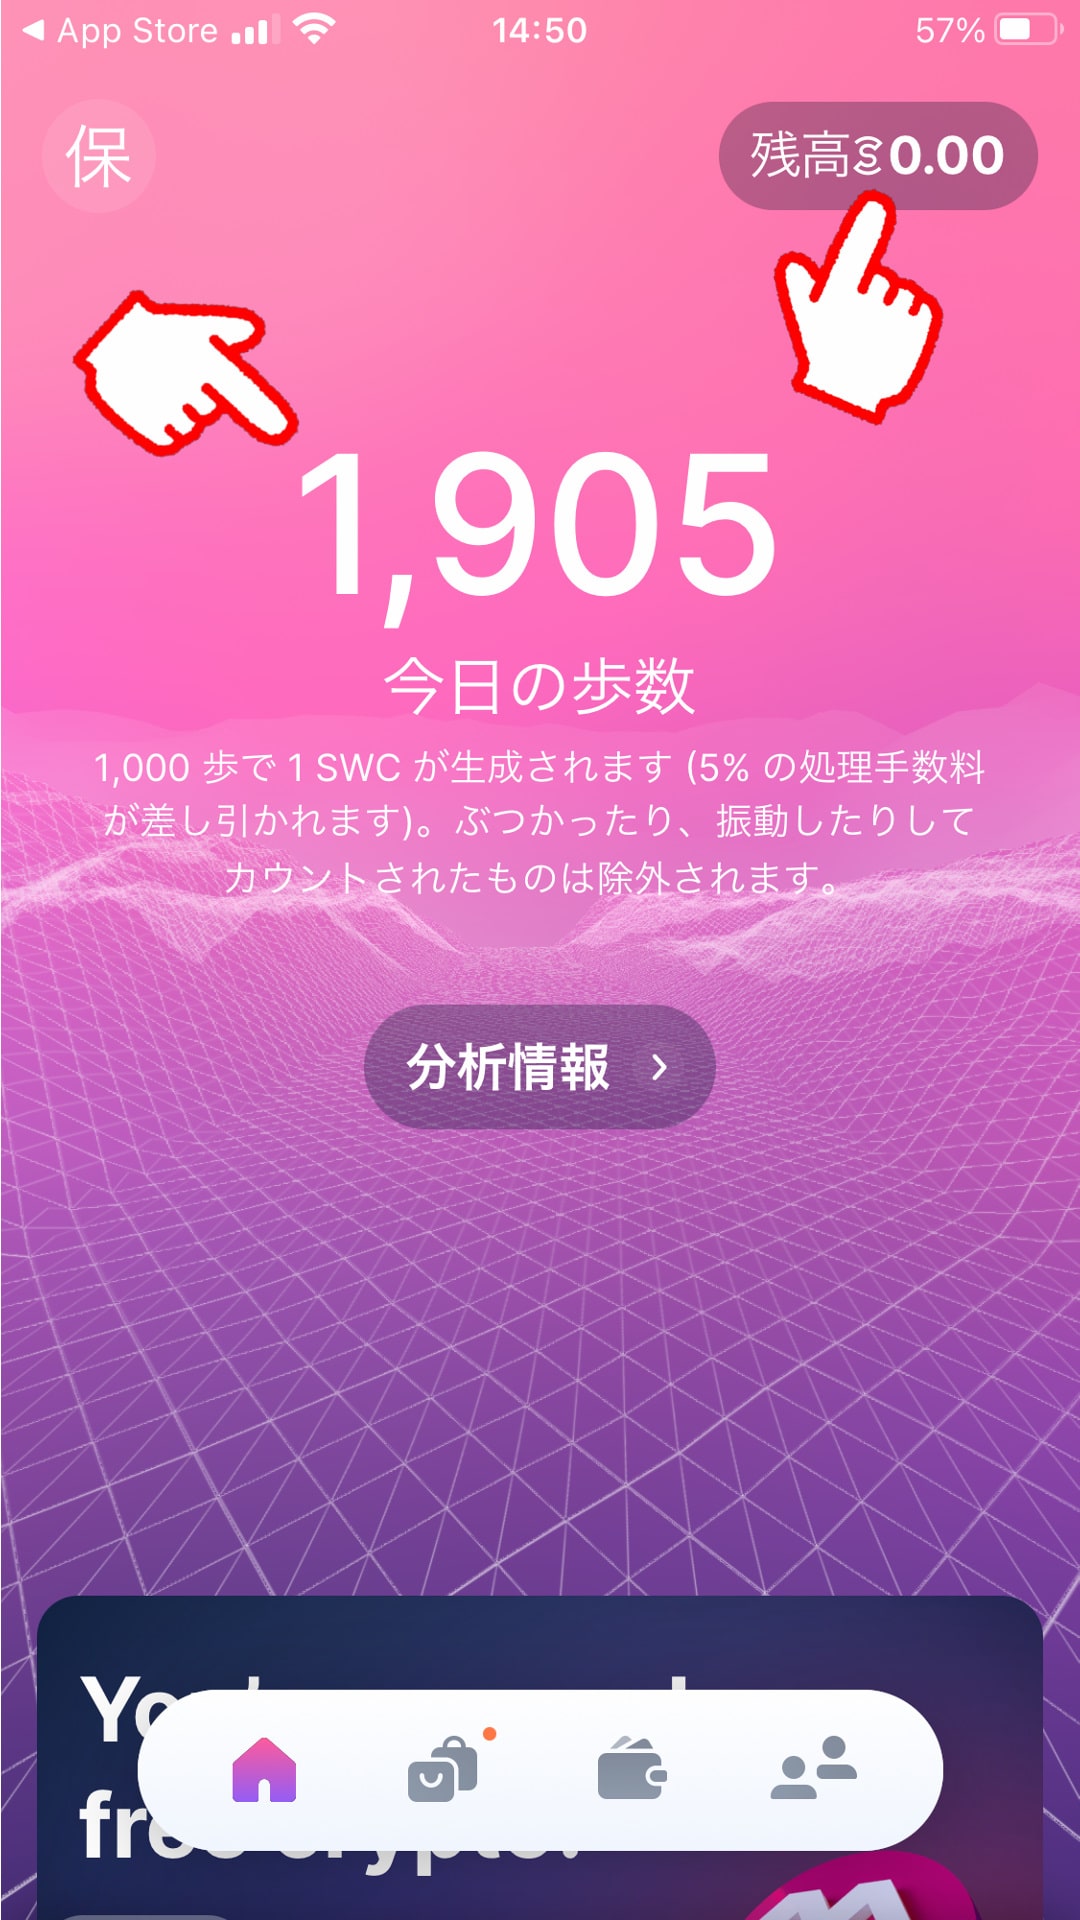 Sweatcoinアプリ管理画面